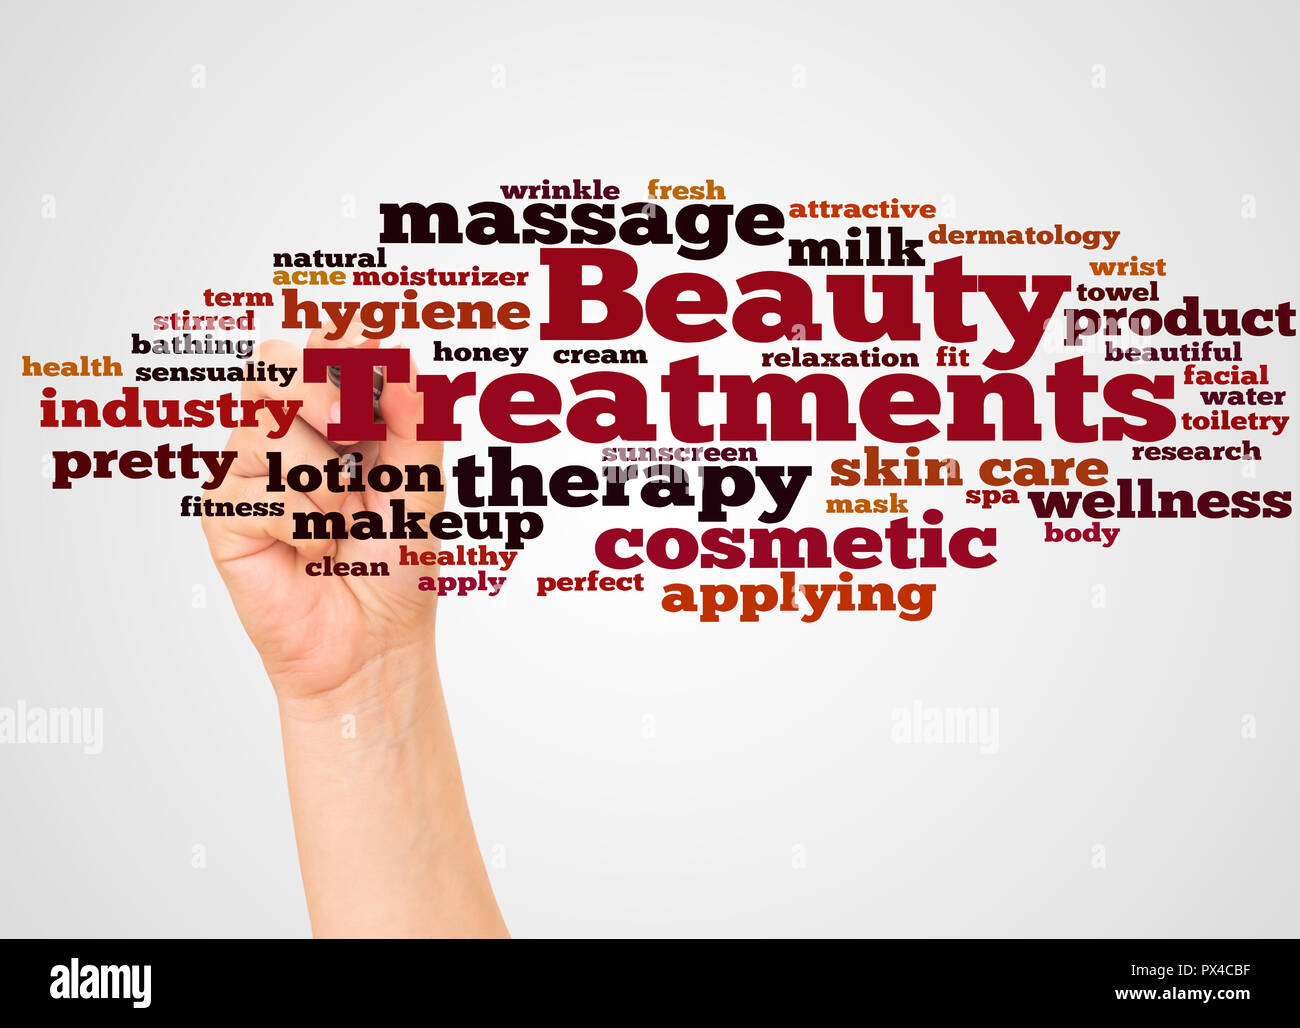 Beauty Treatments word cloud and hand with marker concept on white background. Stock Photo